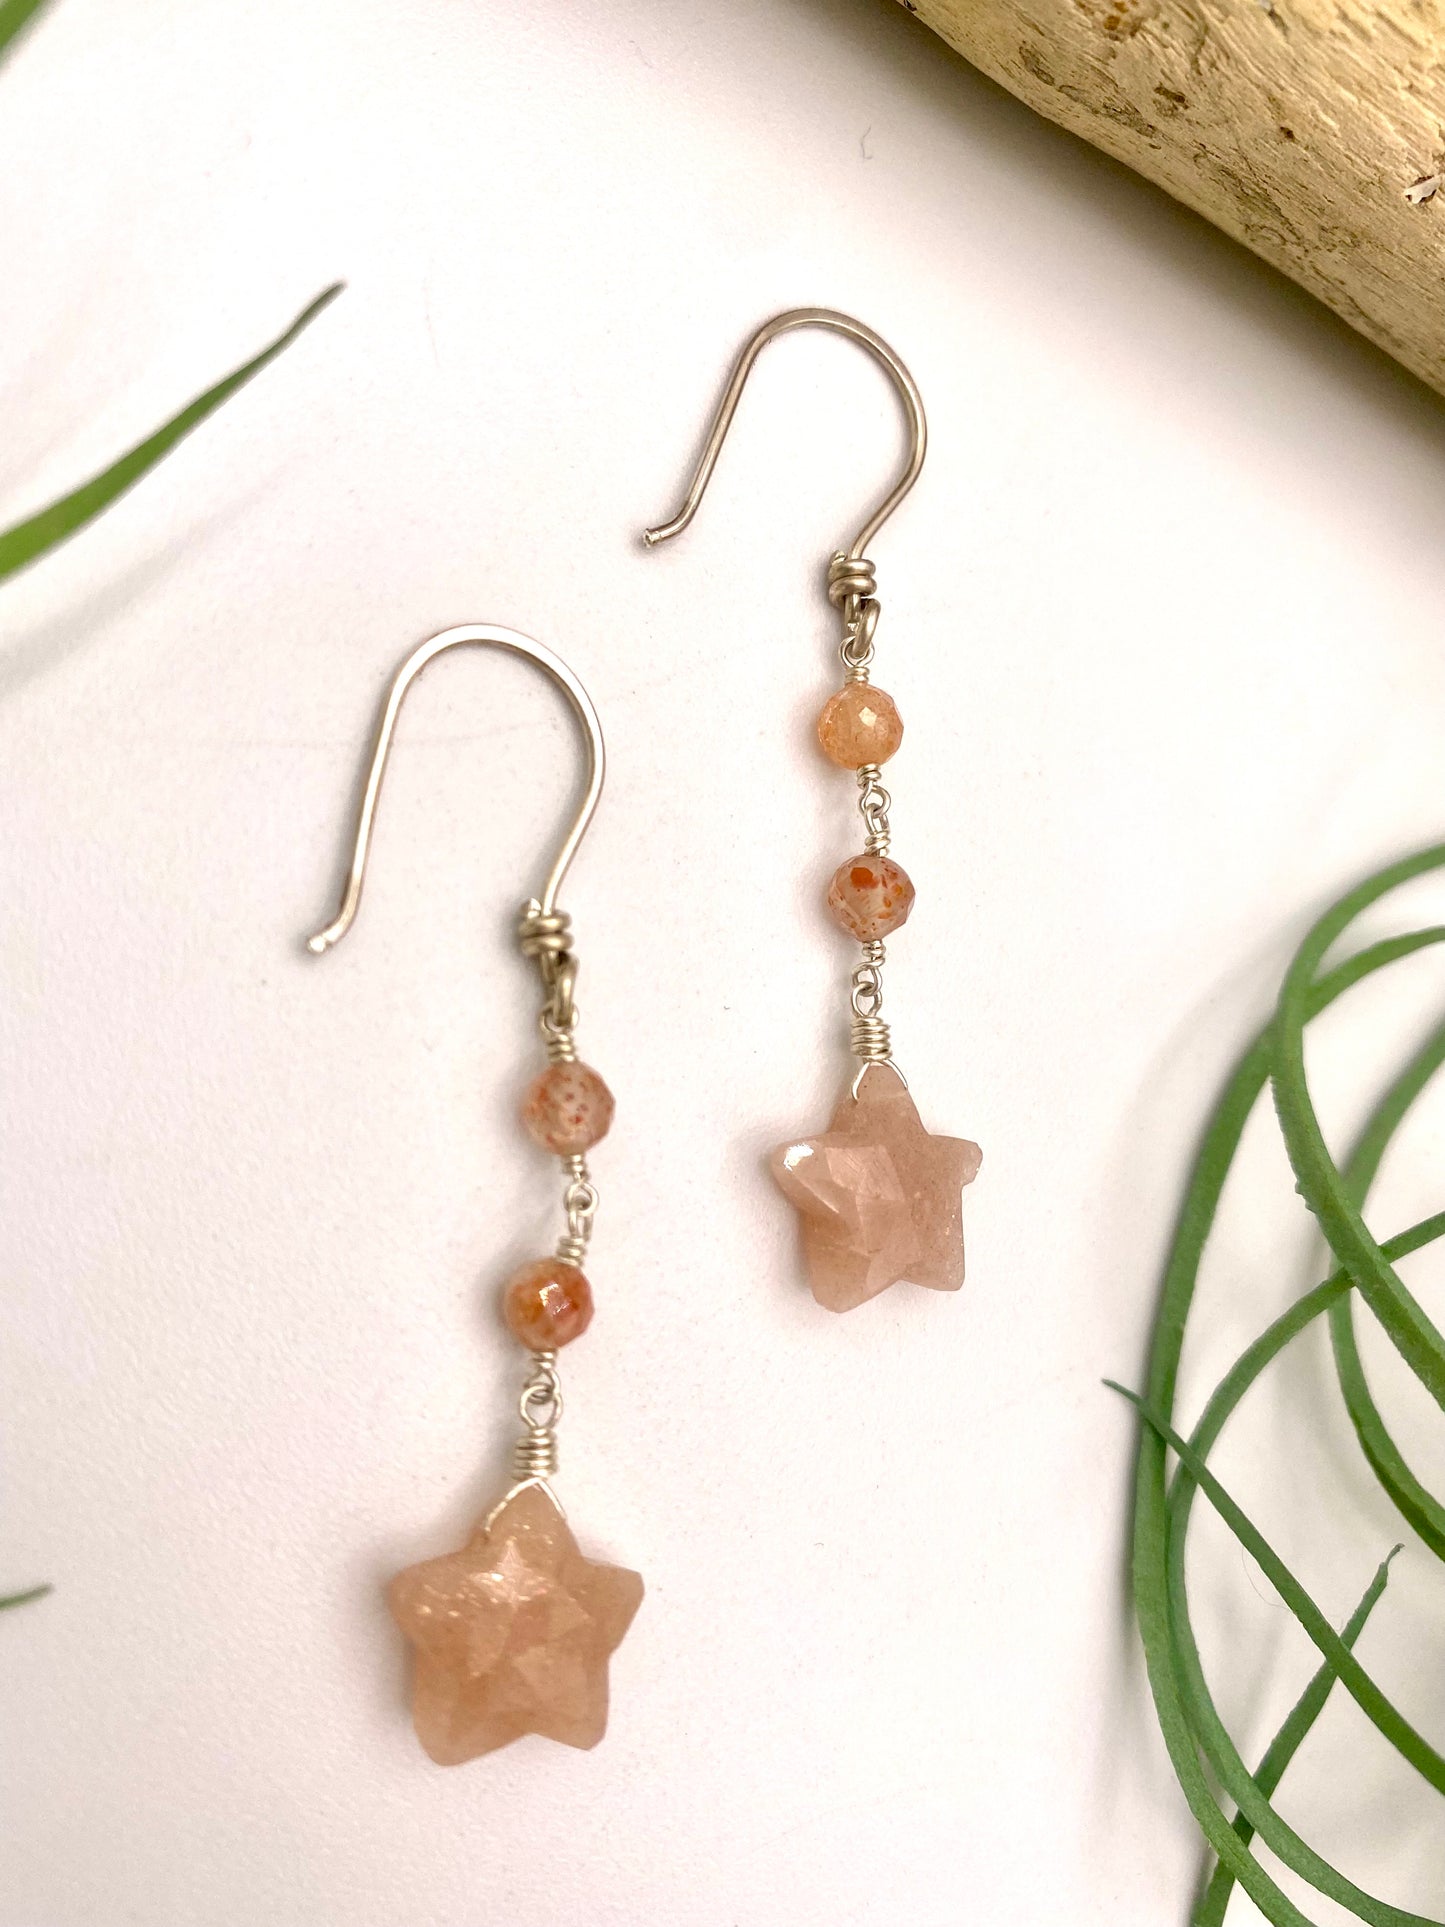 Peach Moonstone Star Earrings with Beads